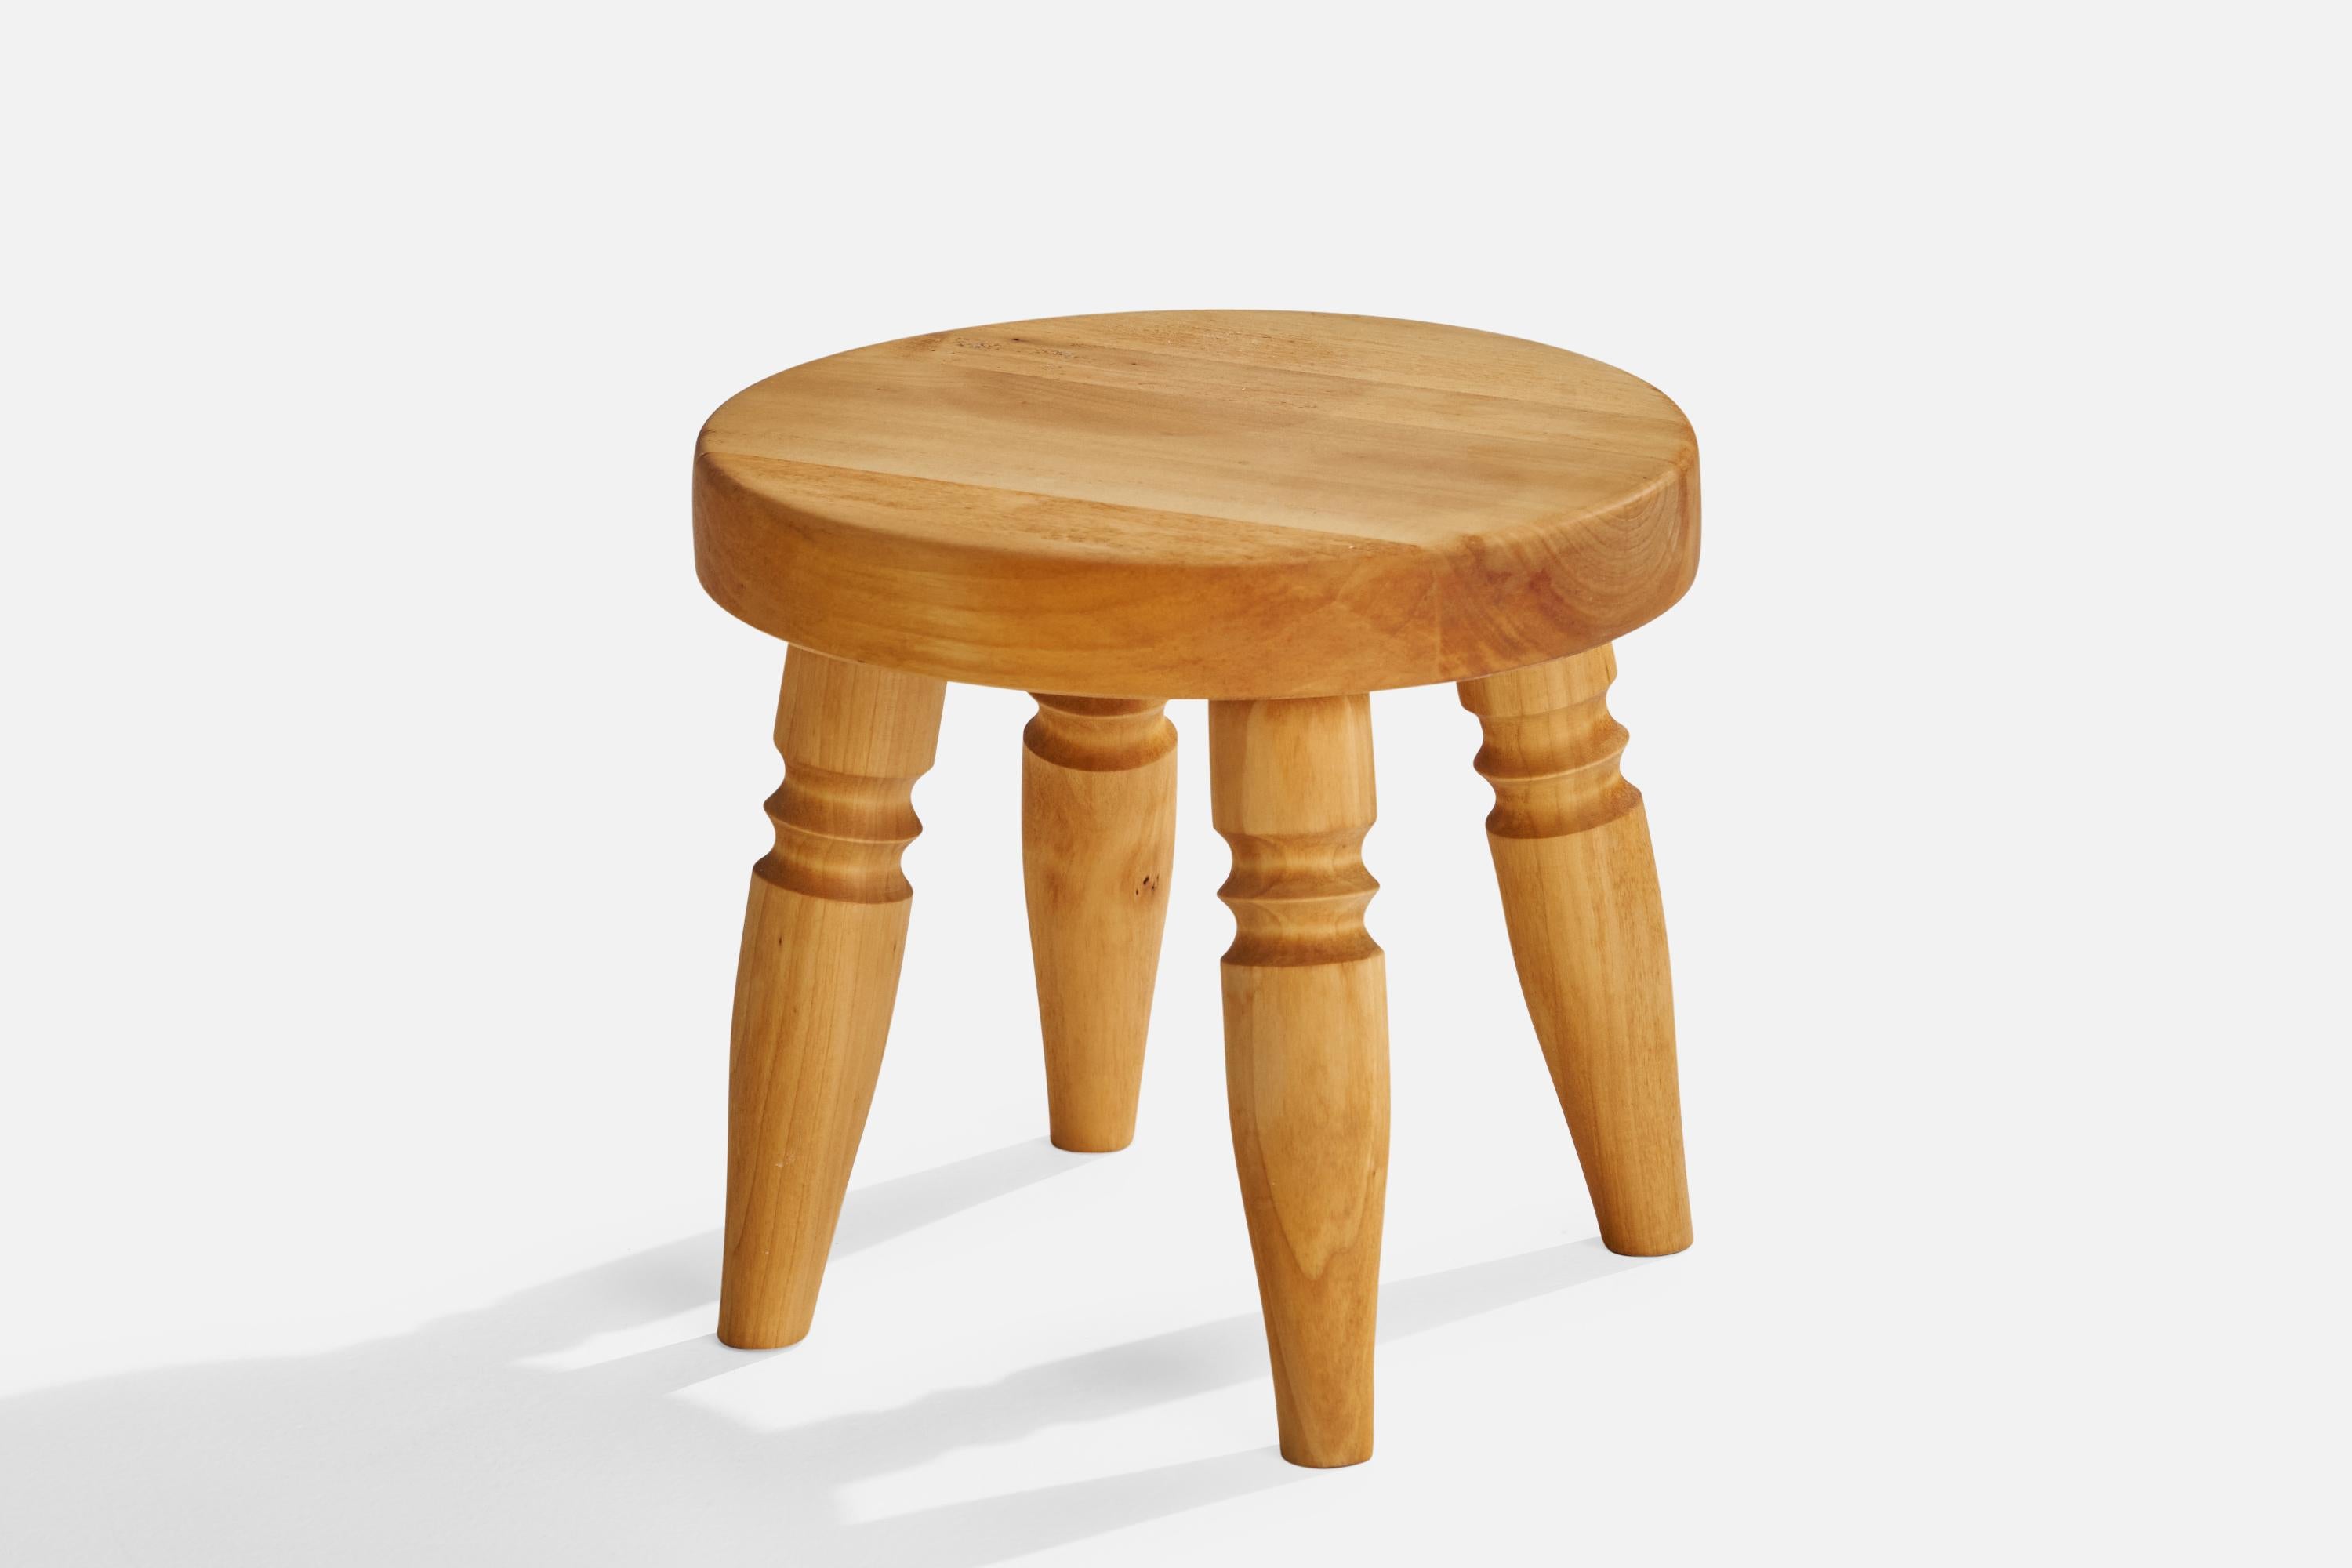 A small birch stool designed and produced in Sweden, c. 1970s.

seat height 8.25”.